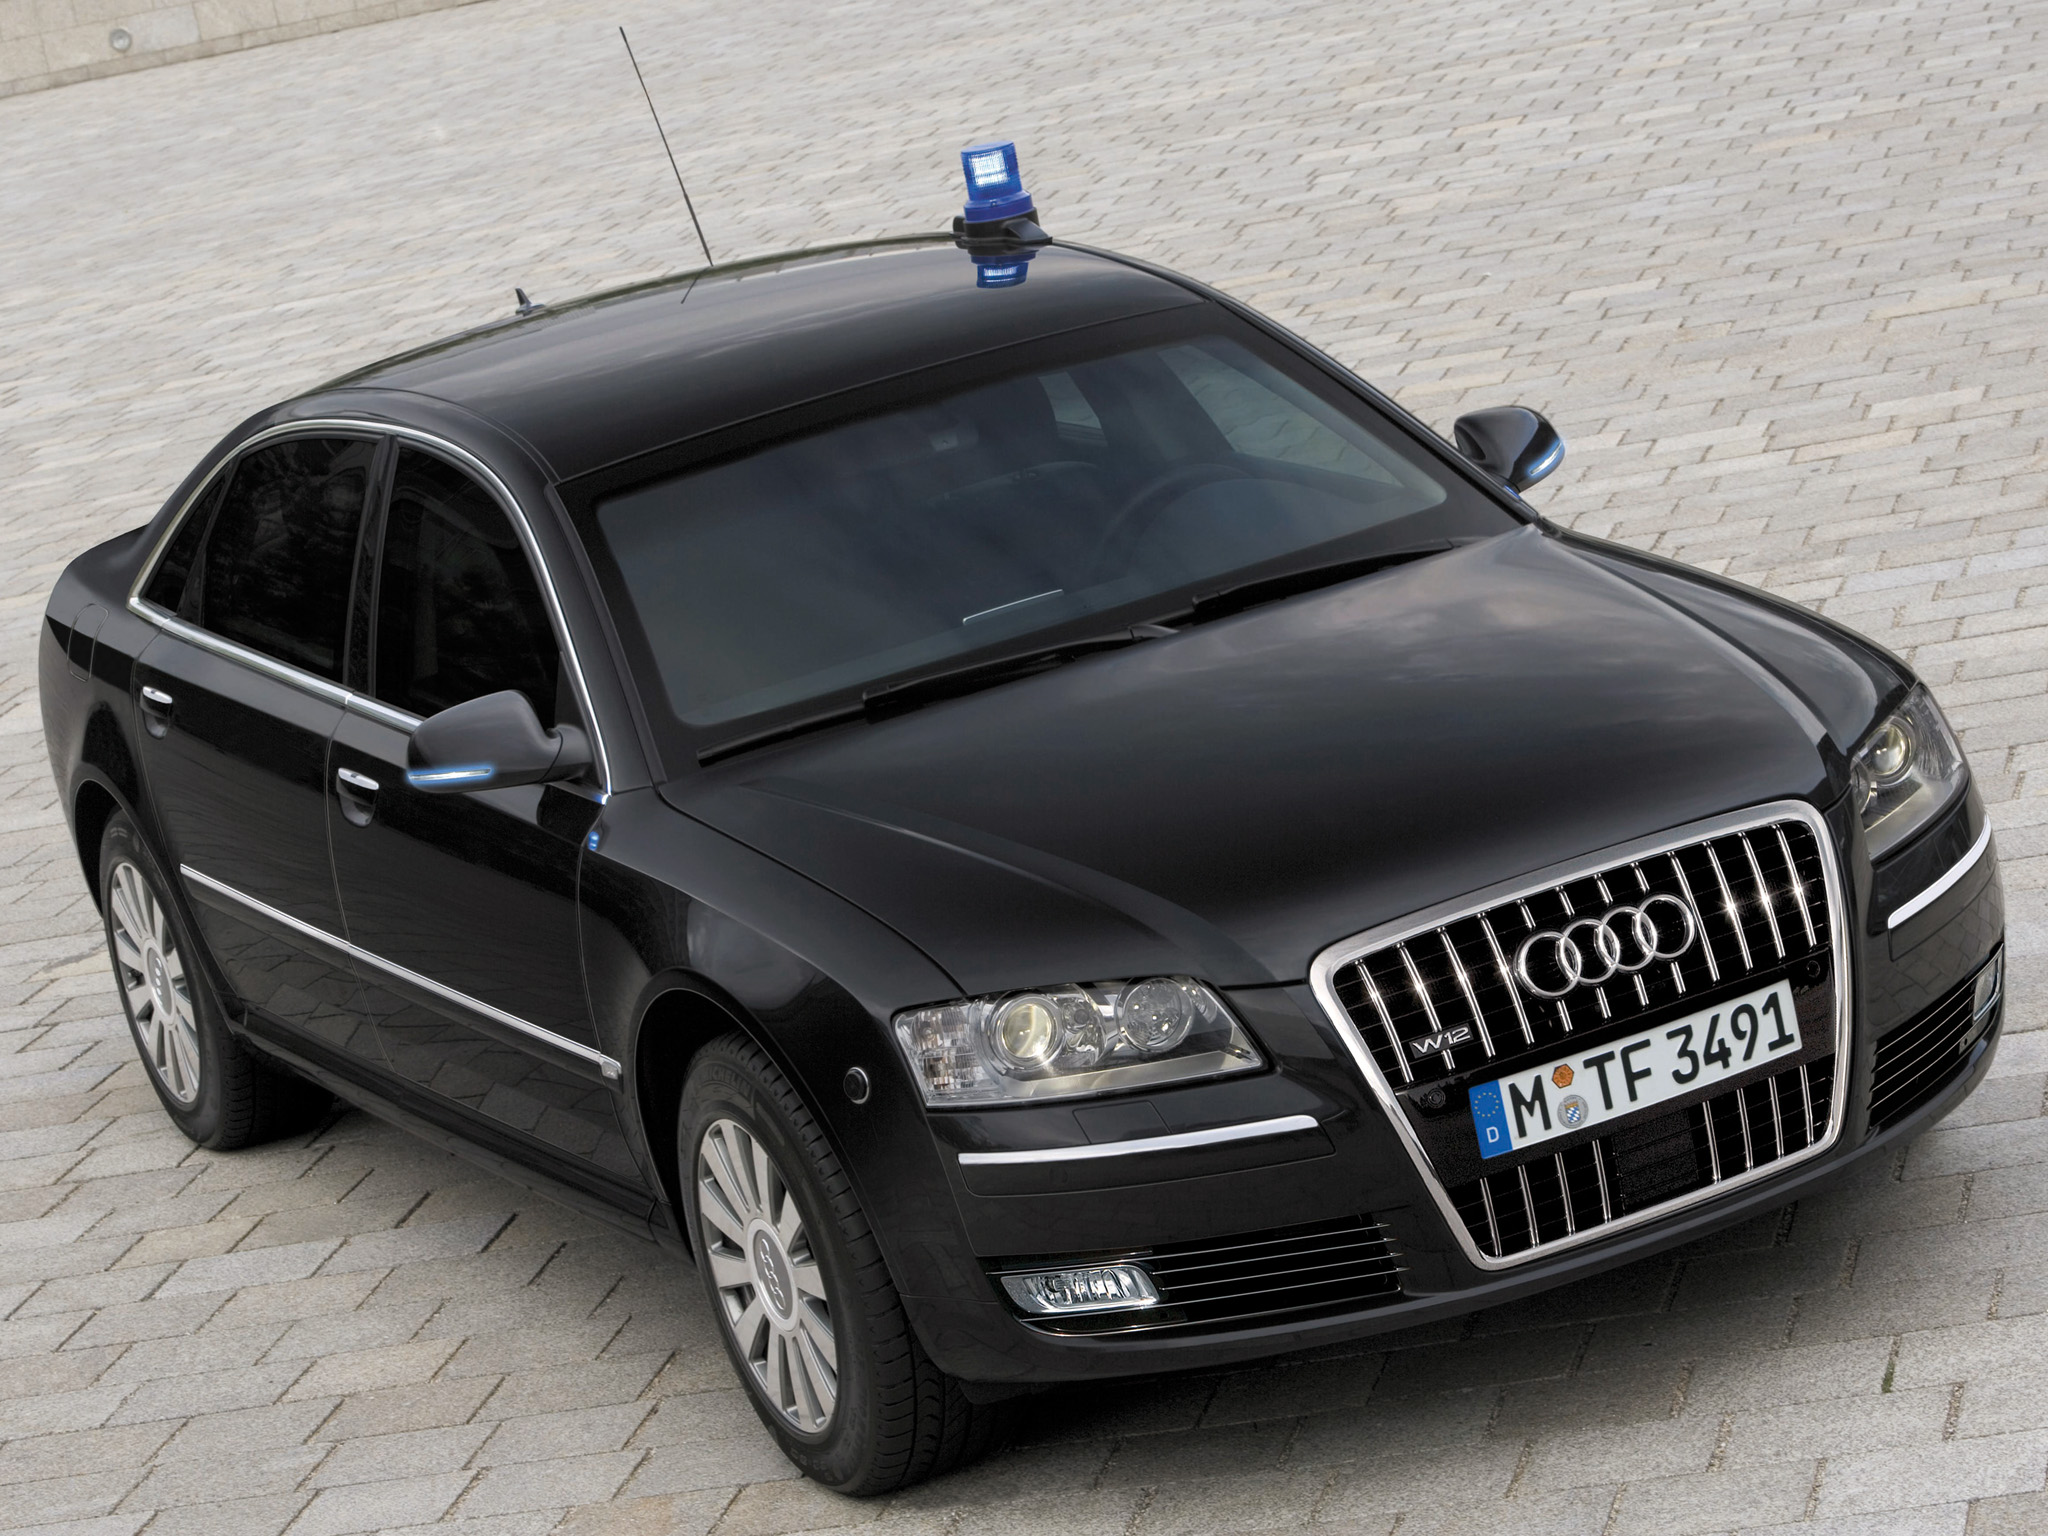 2008, Armored, Audi, A8l, W12, Security, D 3, Police Wallpaper